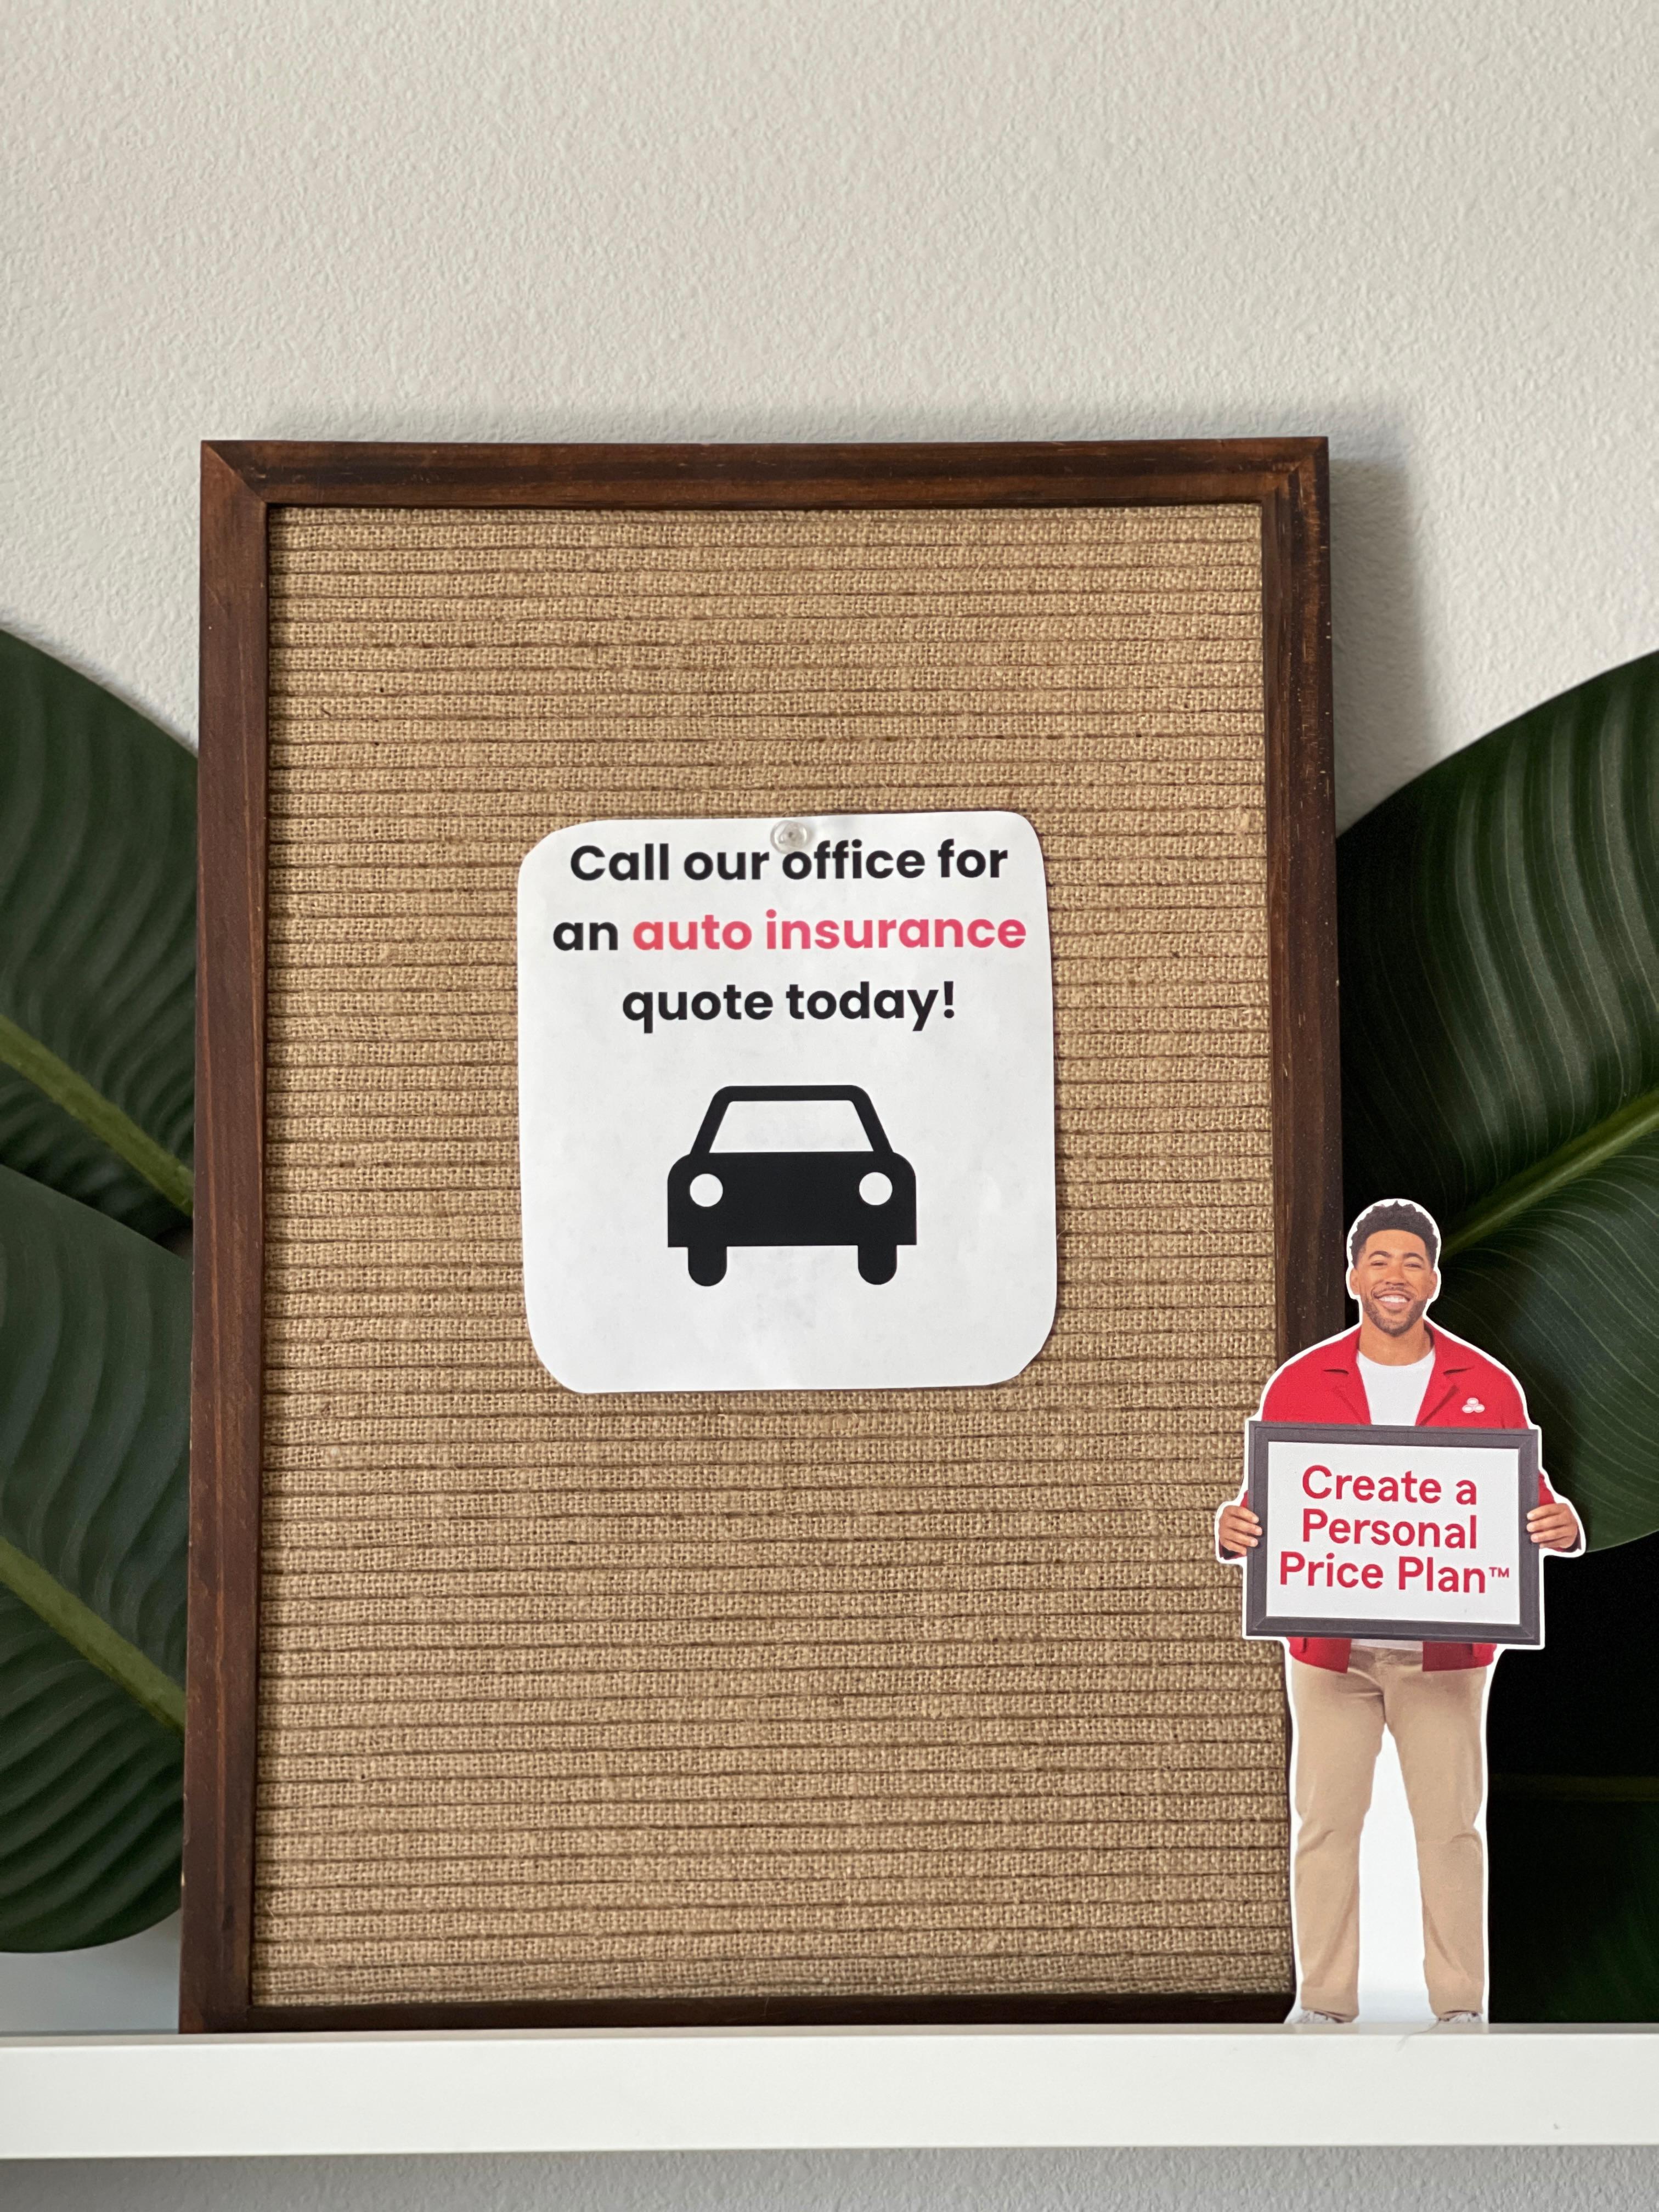 Call or stop by Eric Taylor State Farm for a free car insurance quote today!